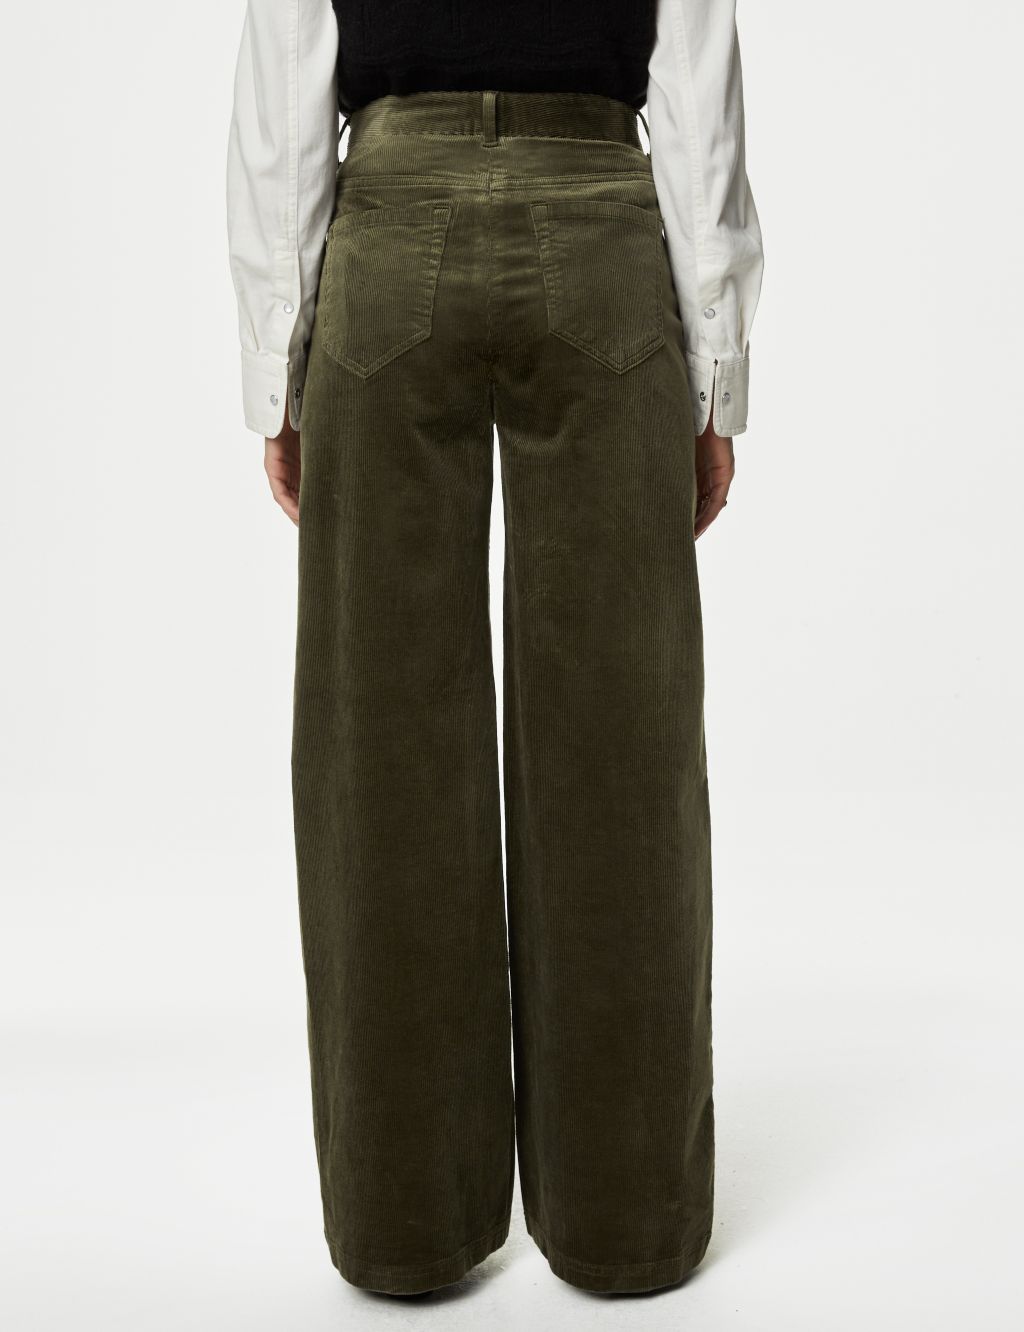 Cord Wide Leg Trousers image 5